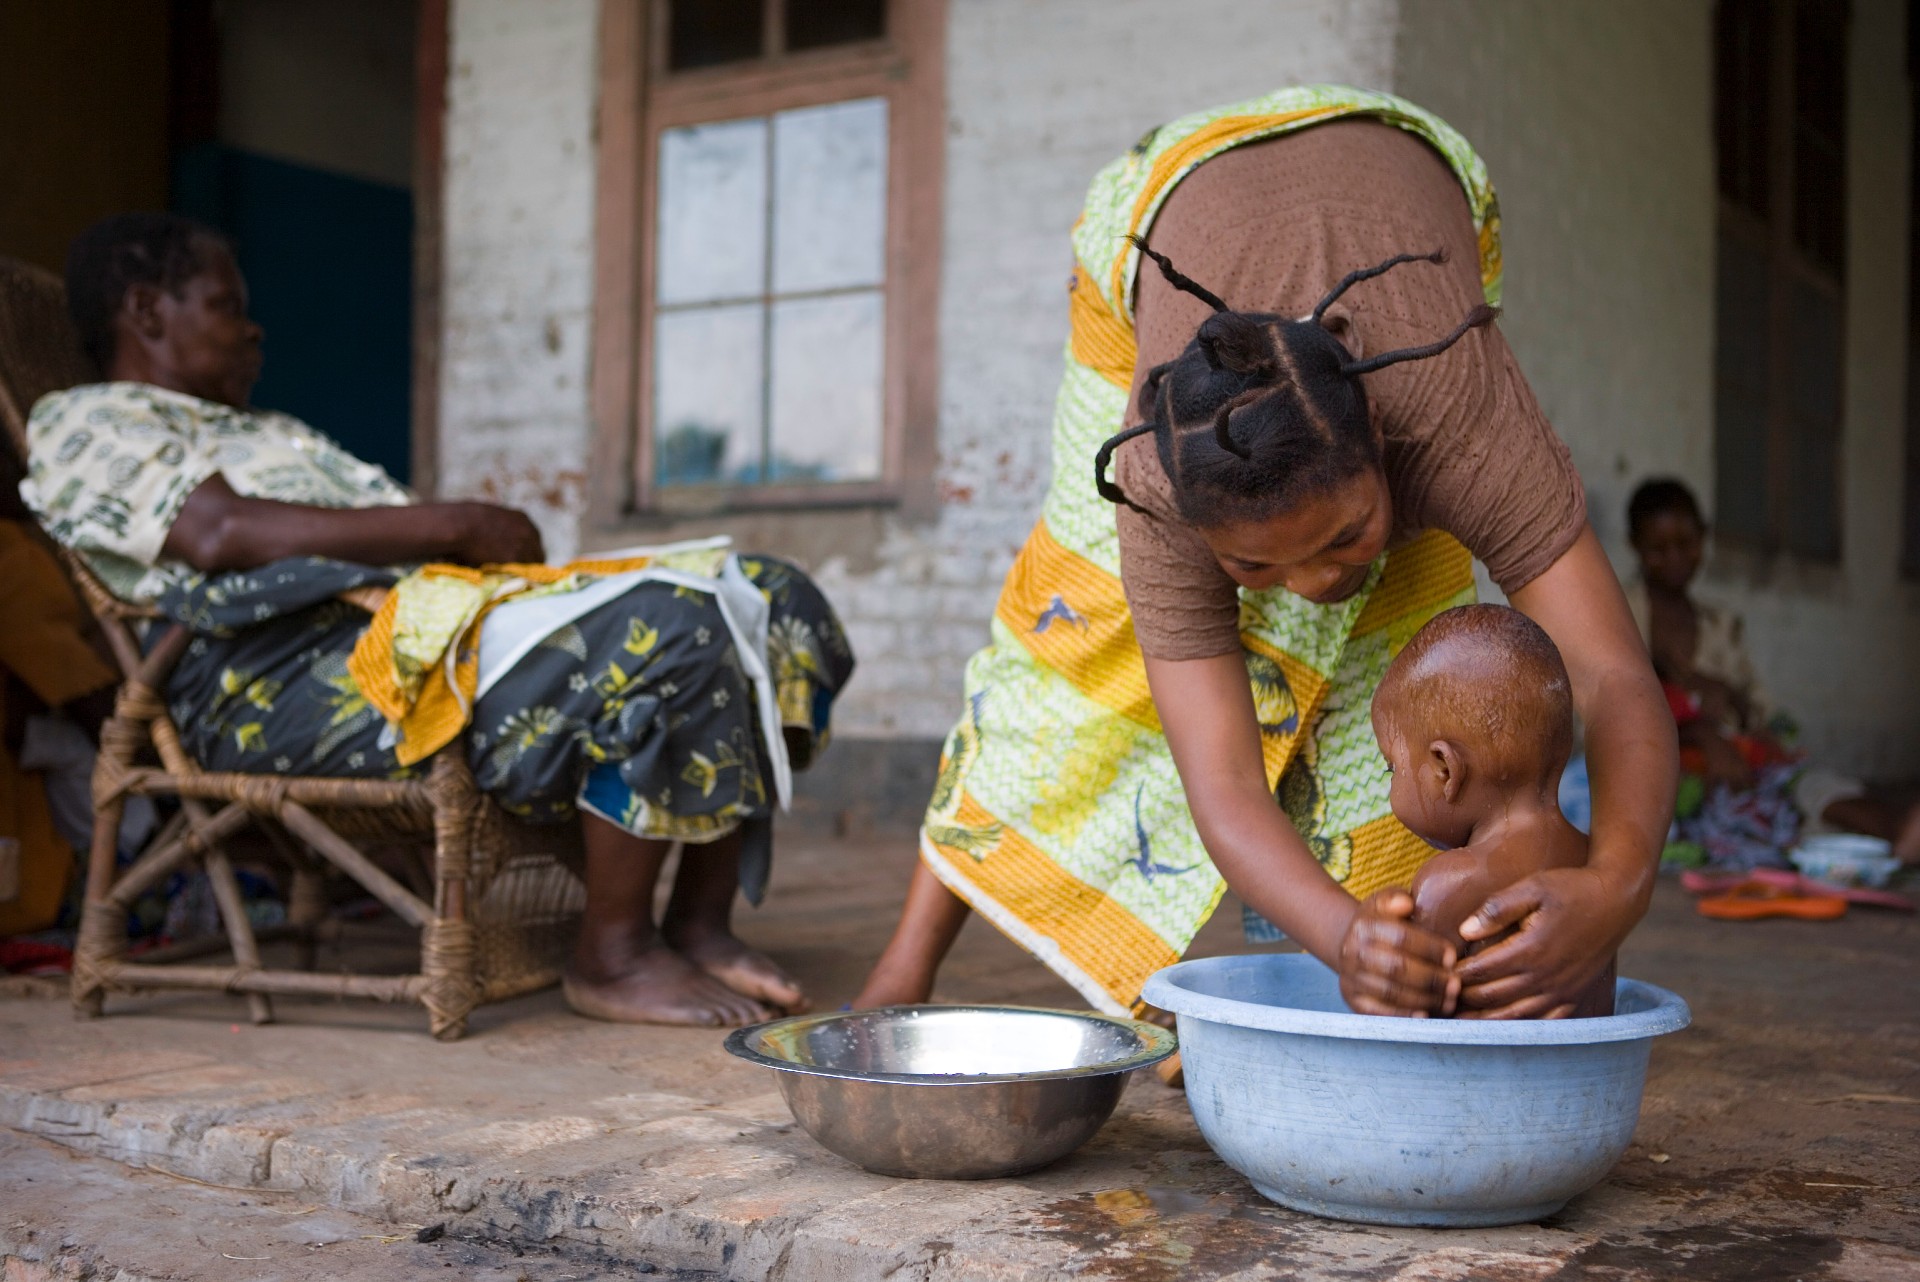 A woman is bathing her child in a bowl.